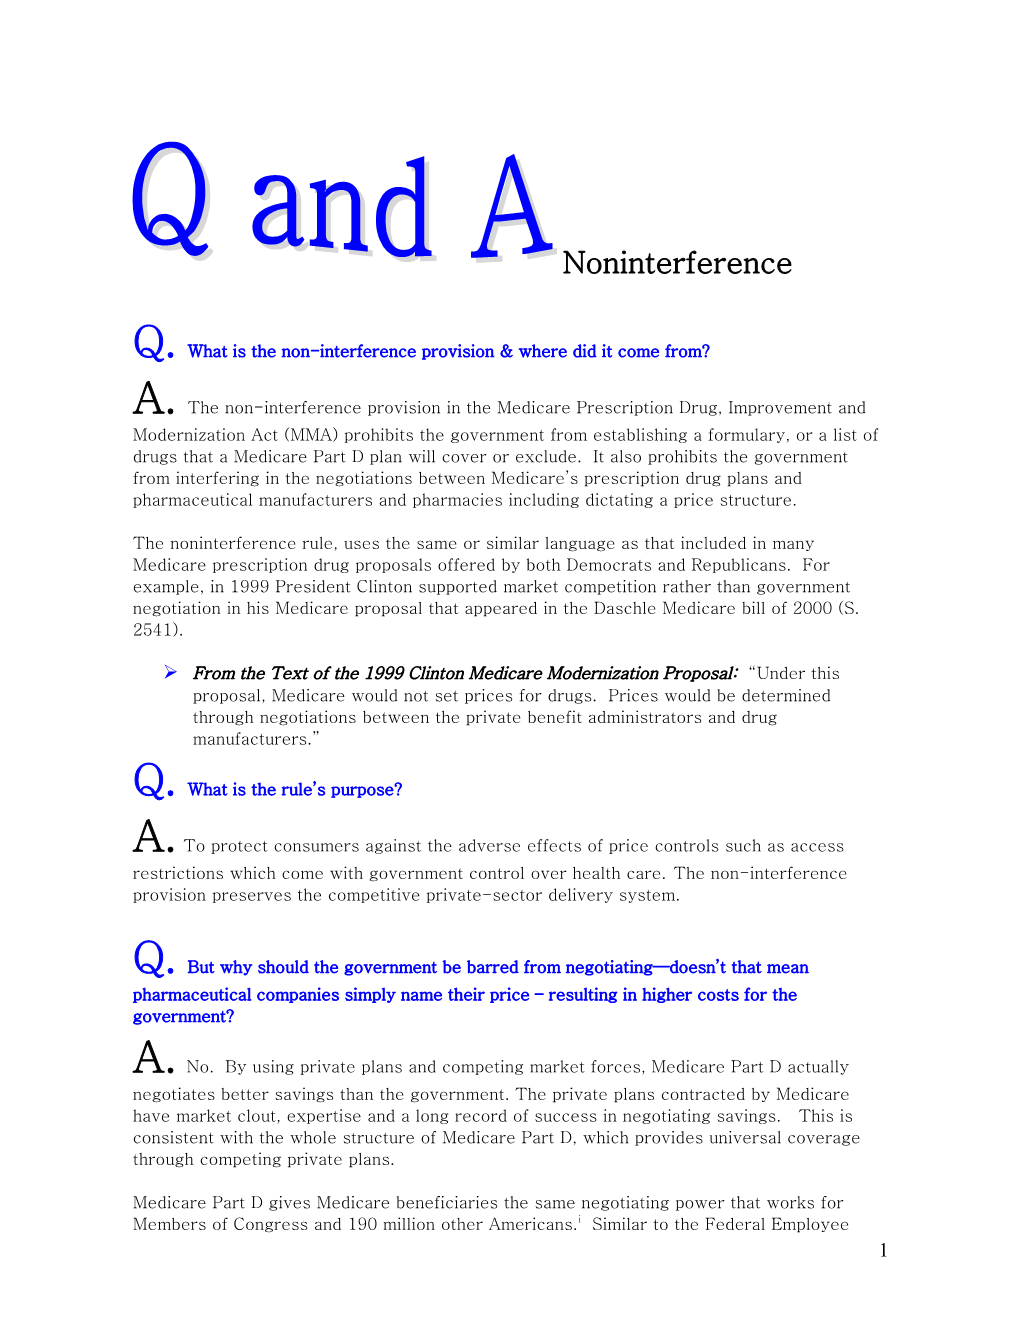 Q. What Is the Non-Interference Provision & Where Did It Come From?